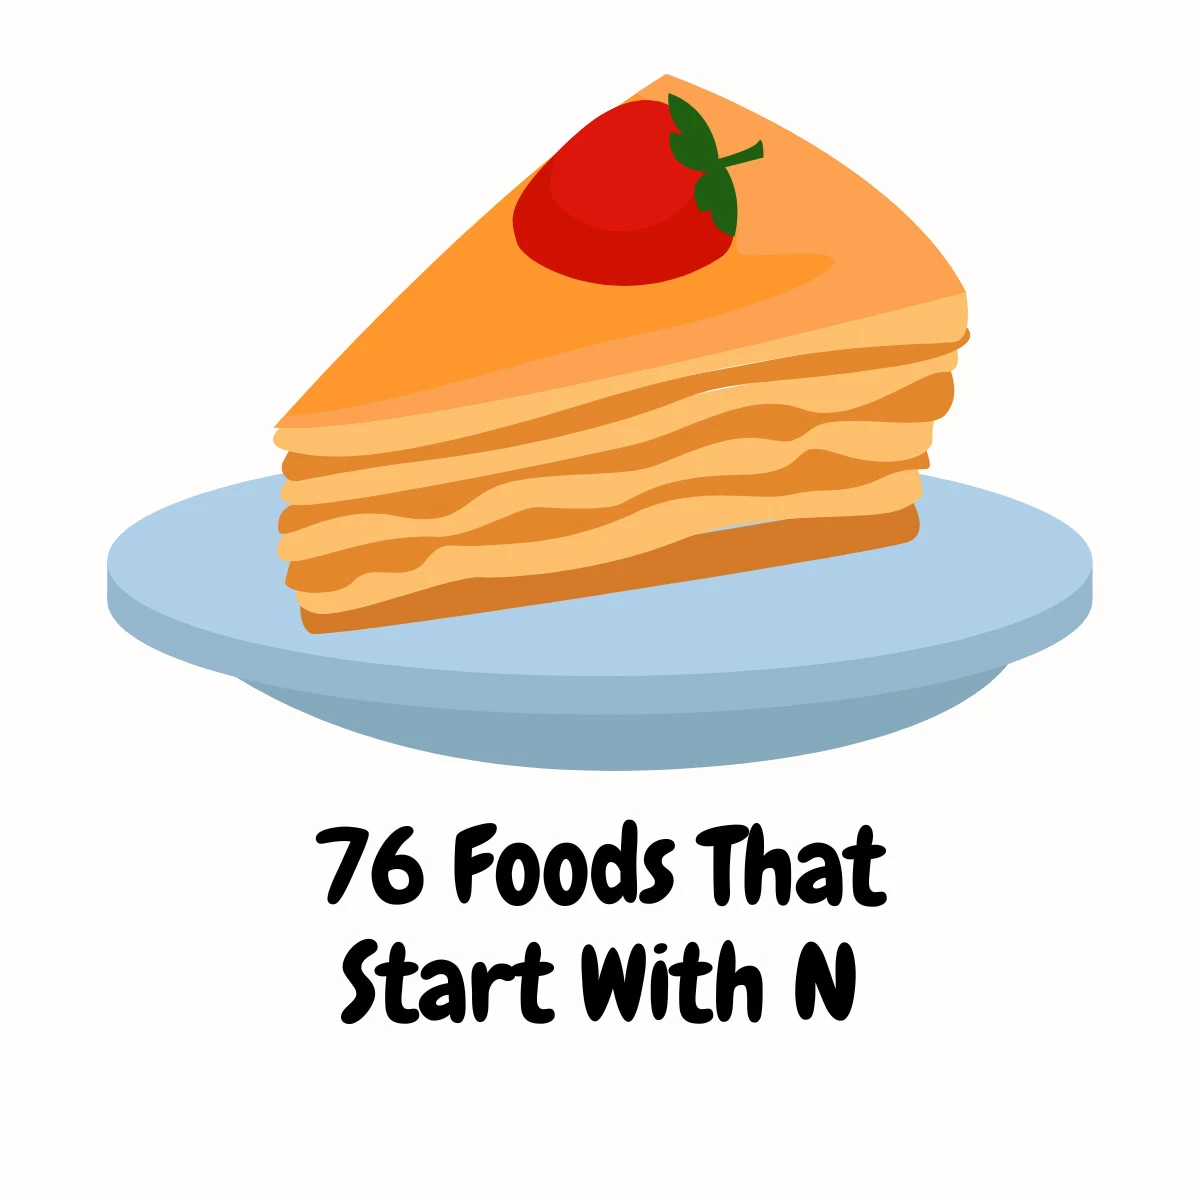 Foods That Start With N featured image | Girl Meets Food